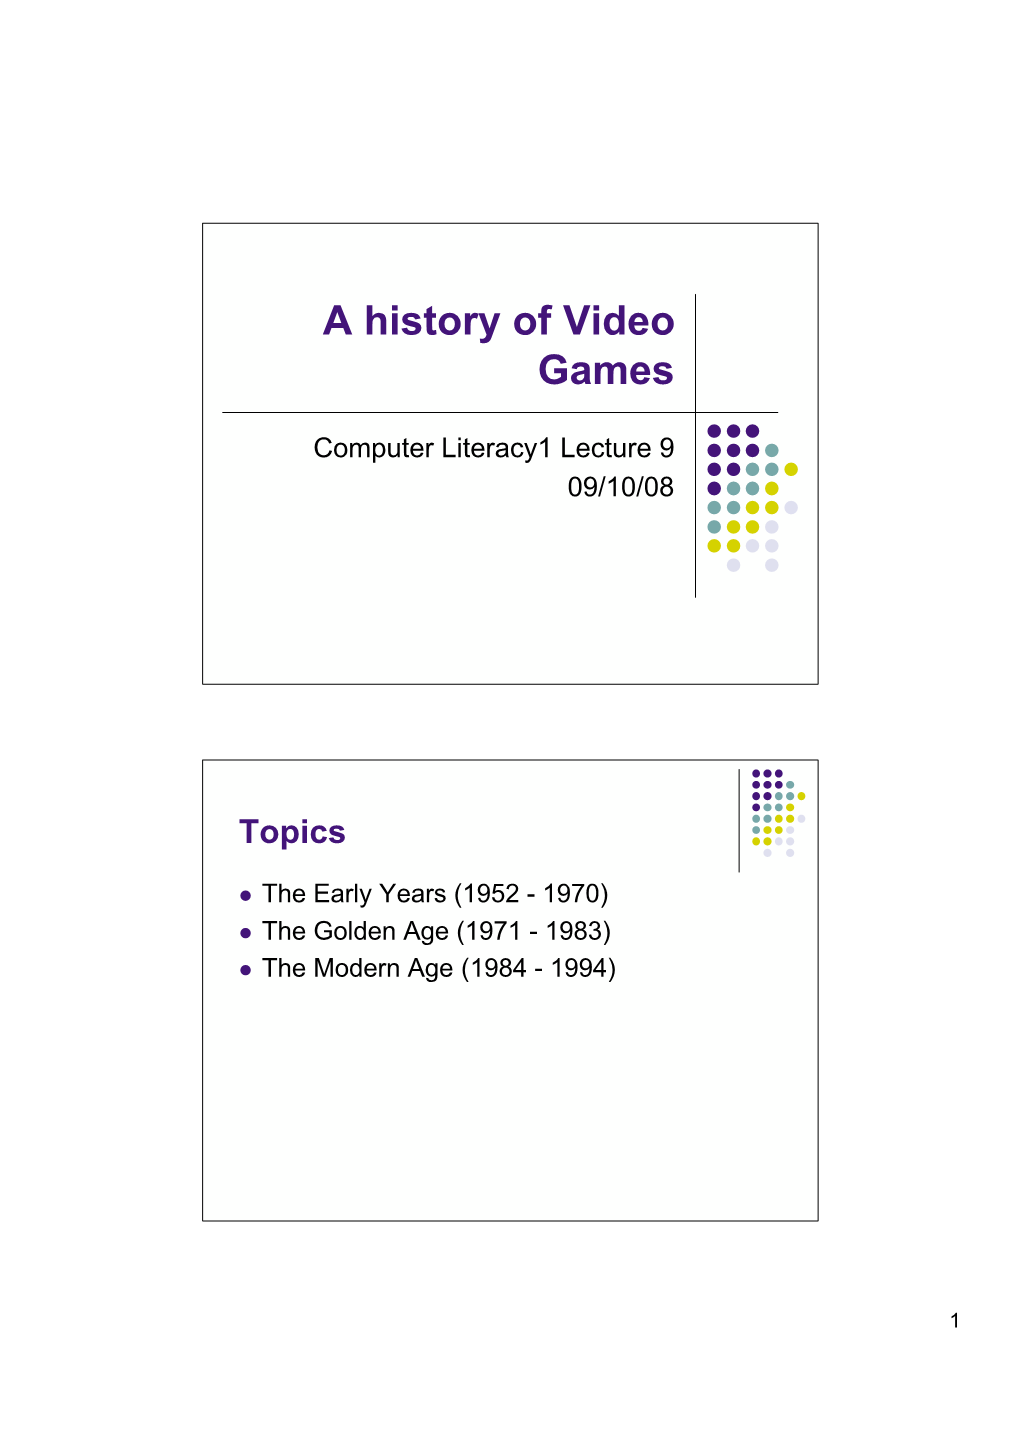 A History of Video Games